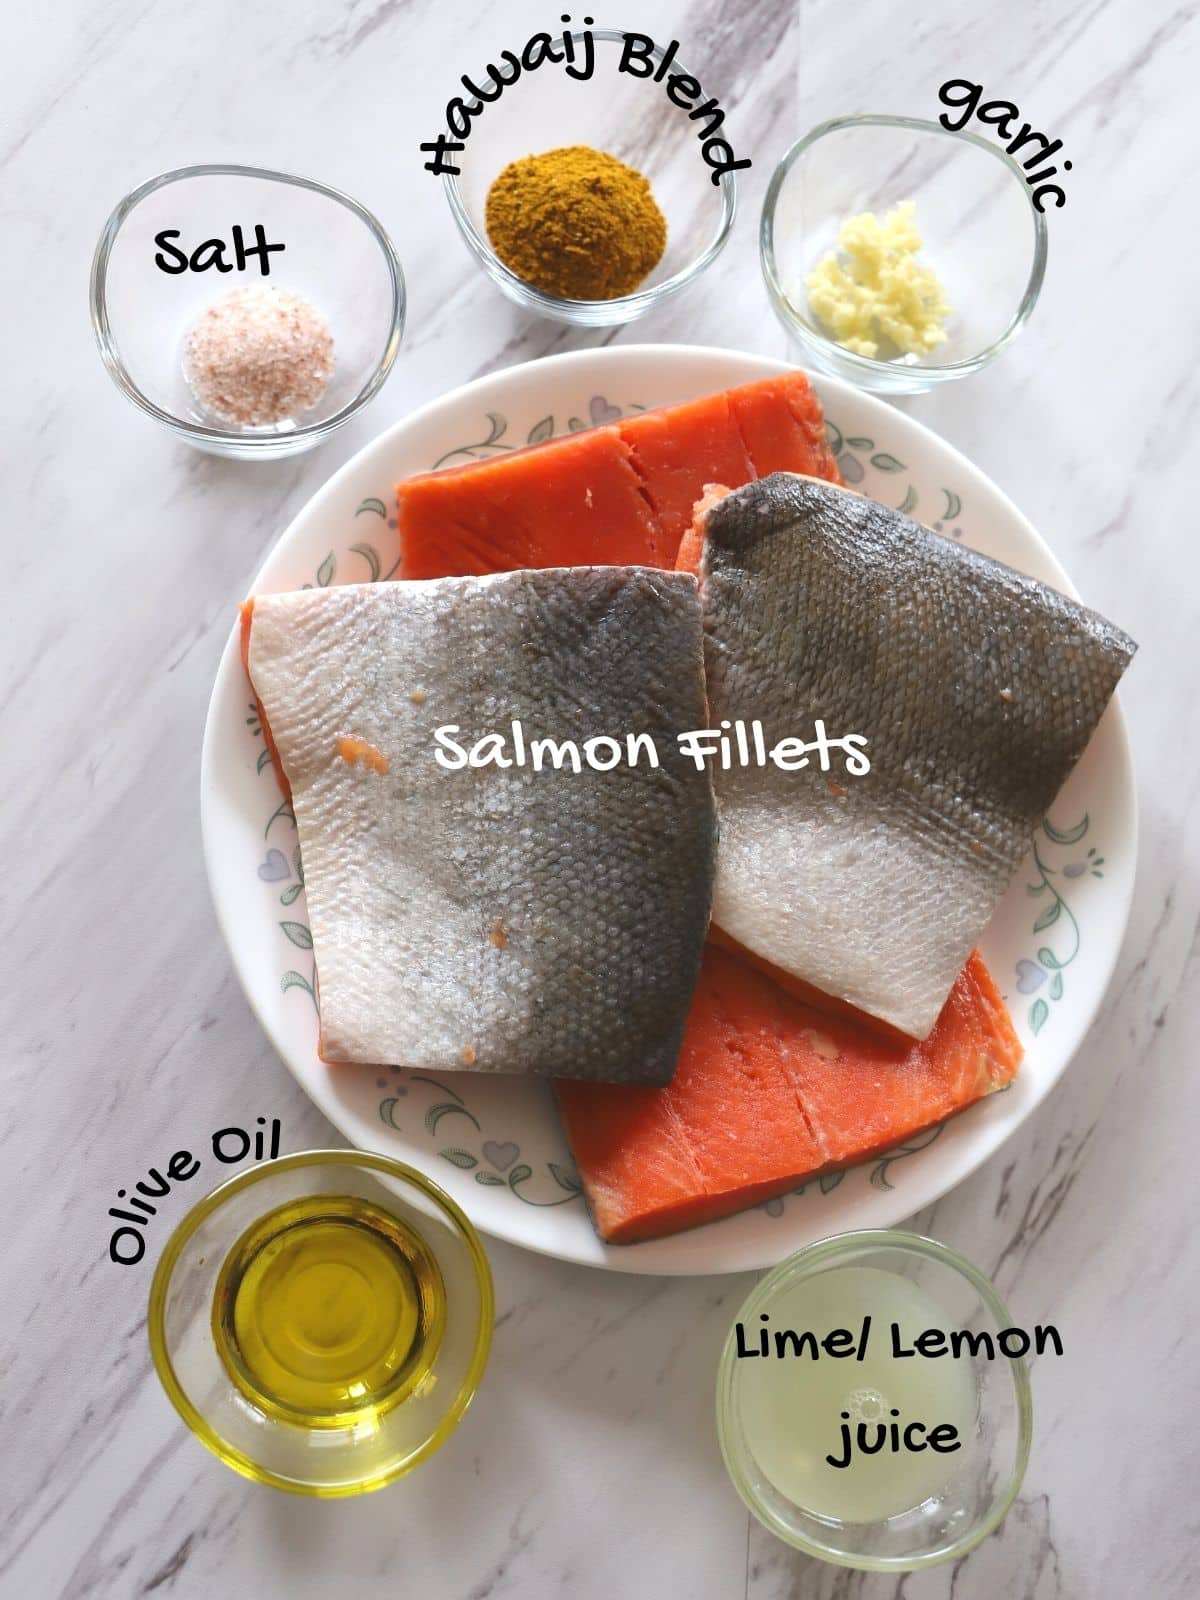 Air fryer salmon ingredients placed on a wgite surface.